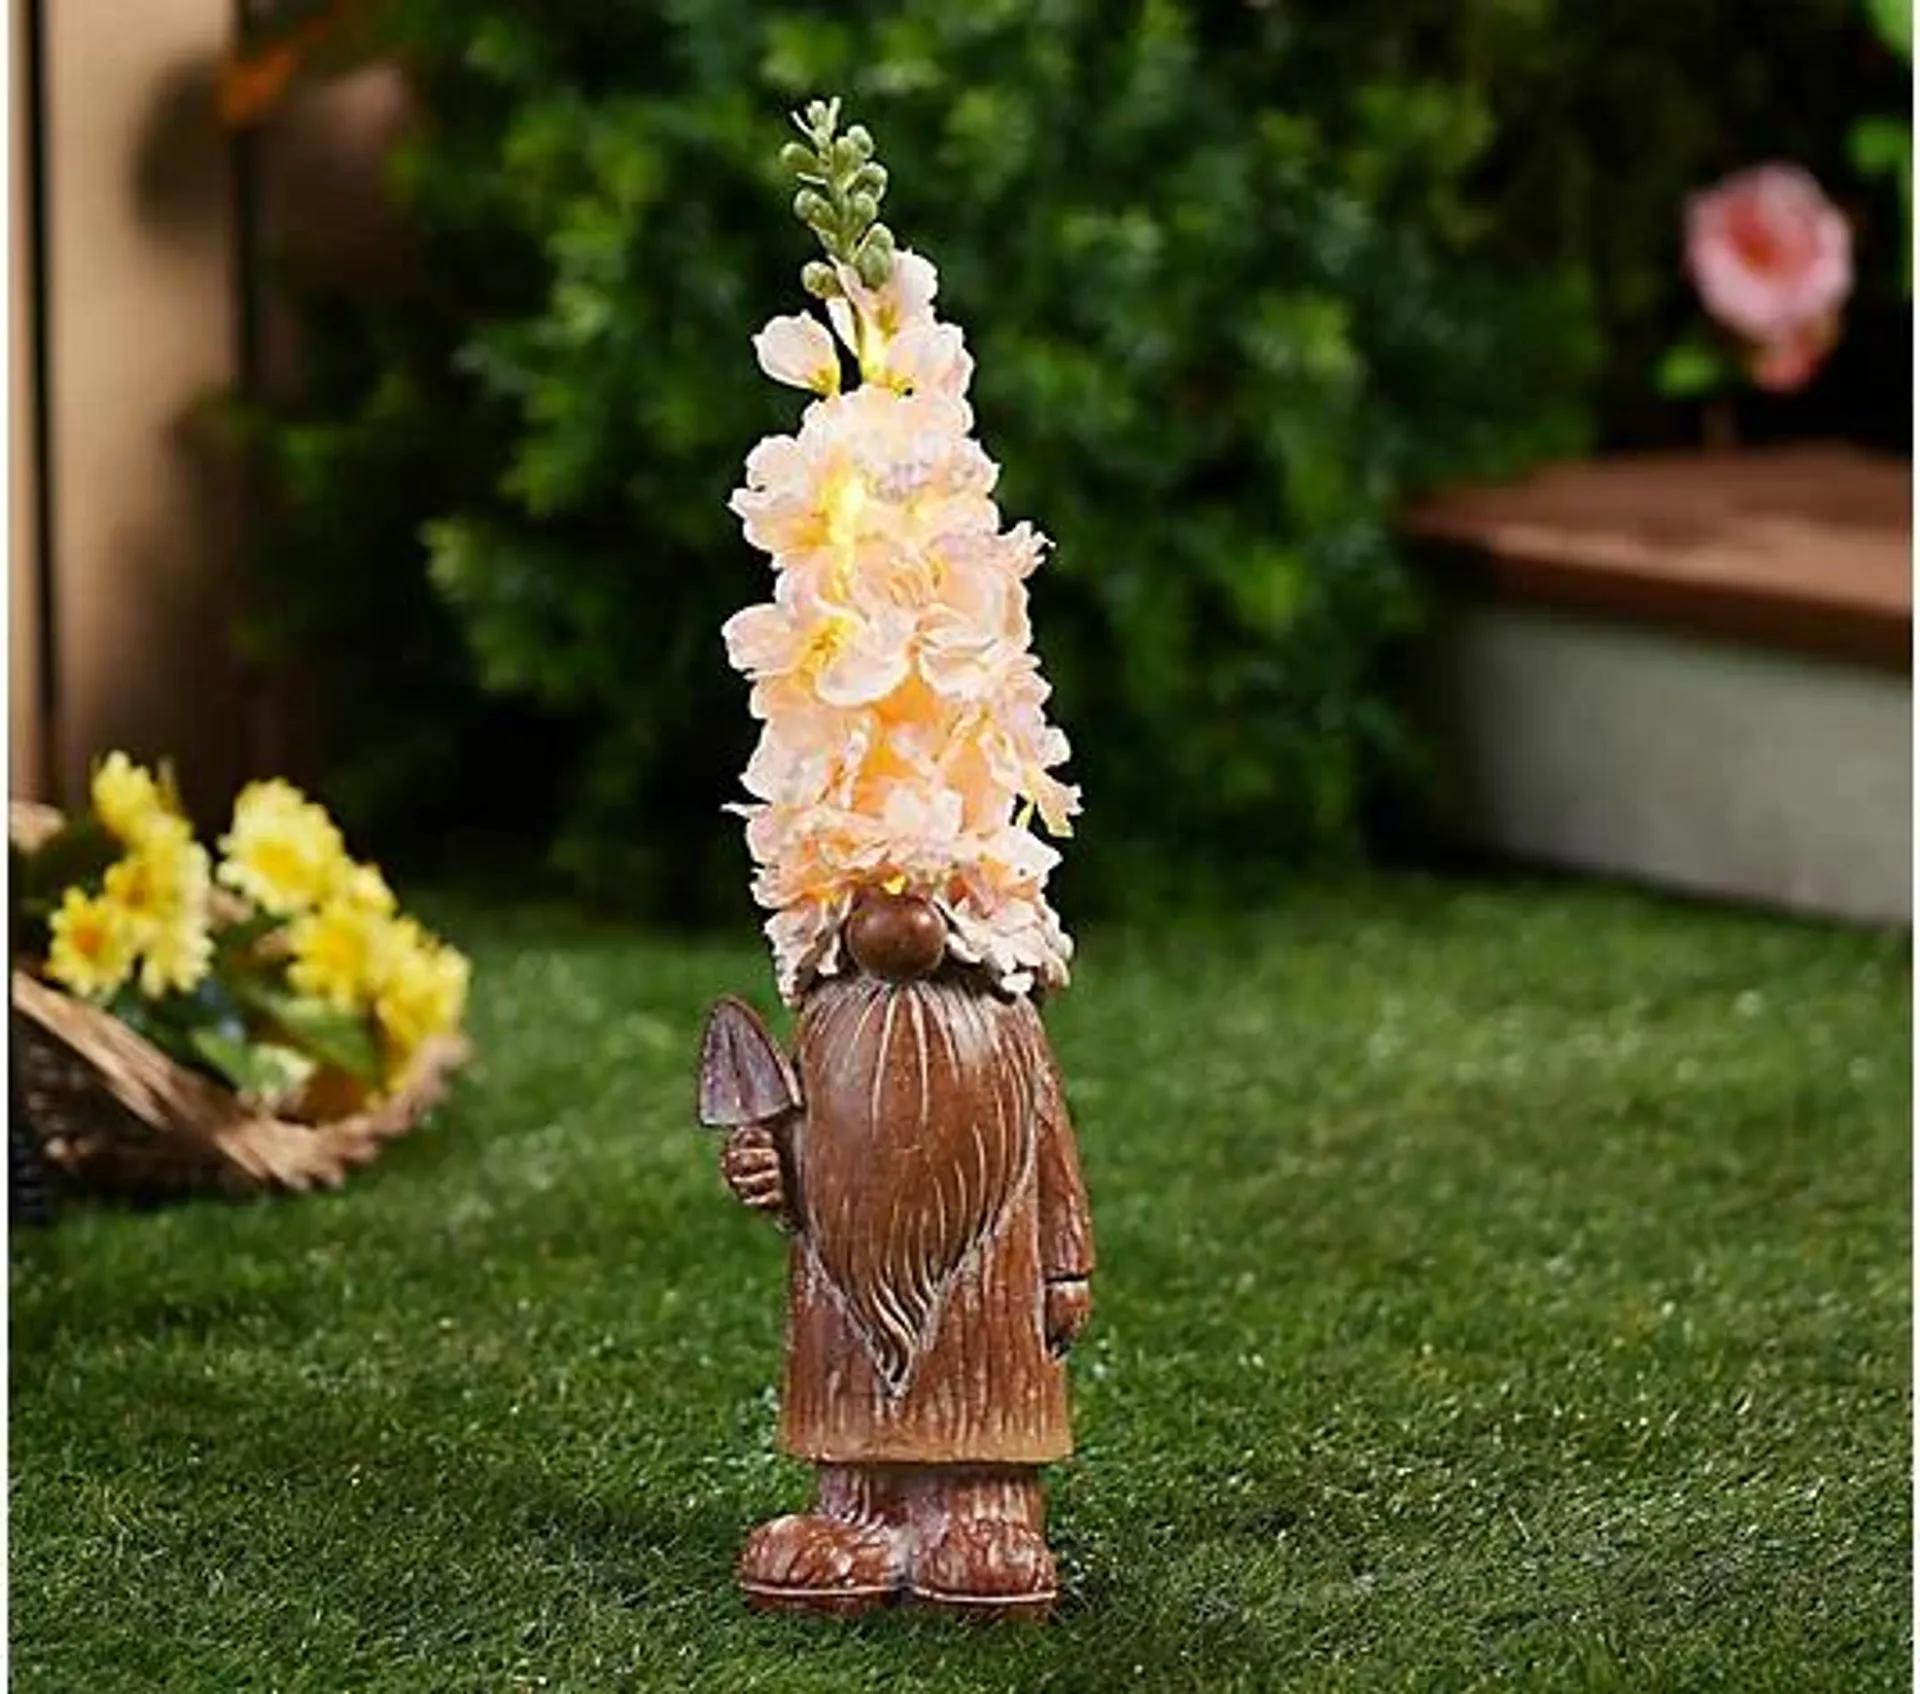 Barbara King 16" Faux Bois Gnome with Illuminated Flower Hat